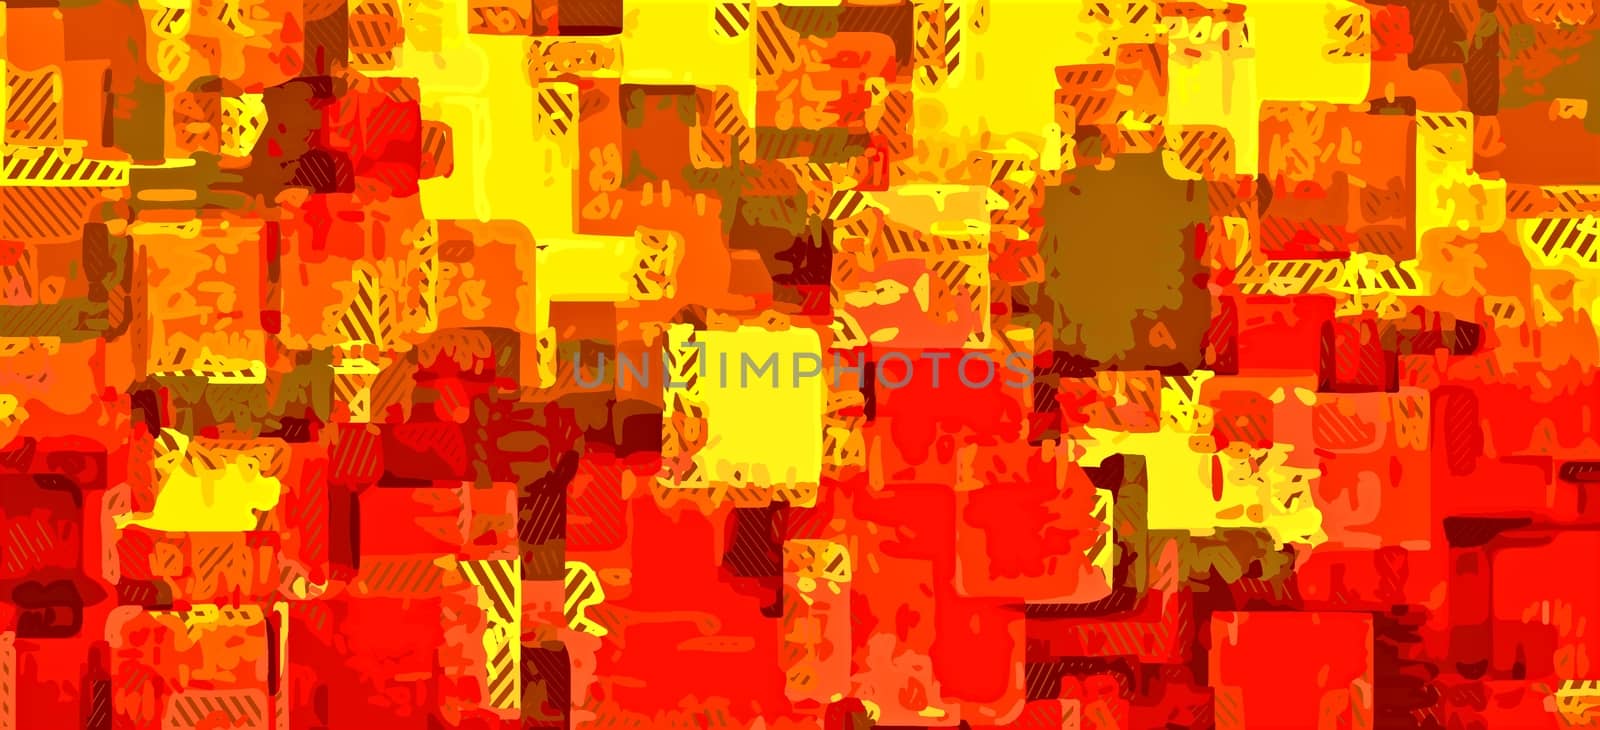 red orange and yellow painting abstract background by Timmi